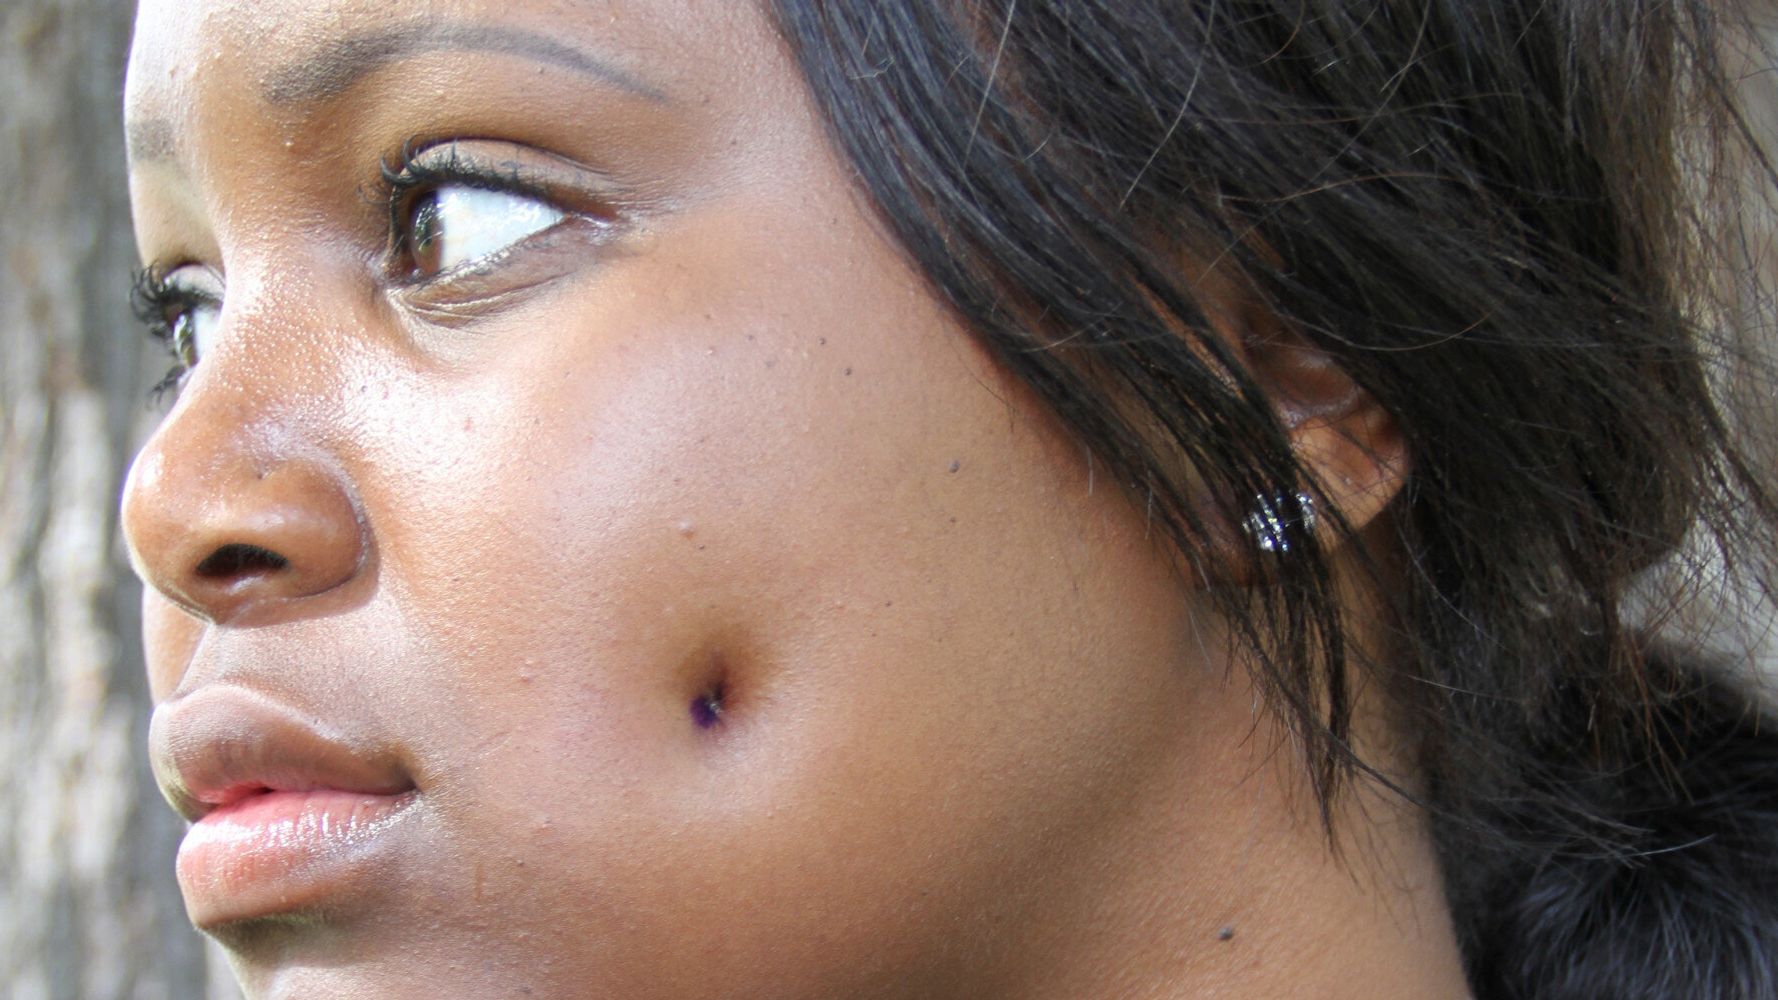 Dimpleplasty Woman Gets £1 500 Cheek Piercing Surgery To Get Dimples